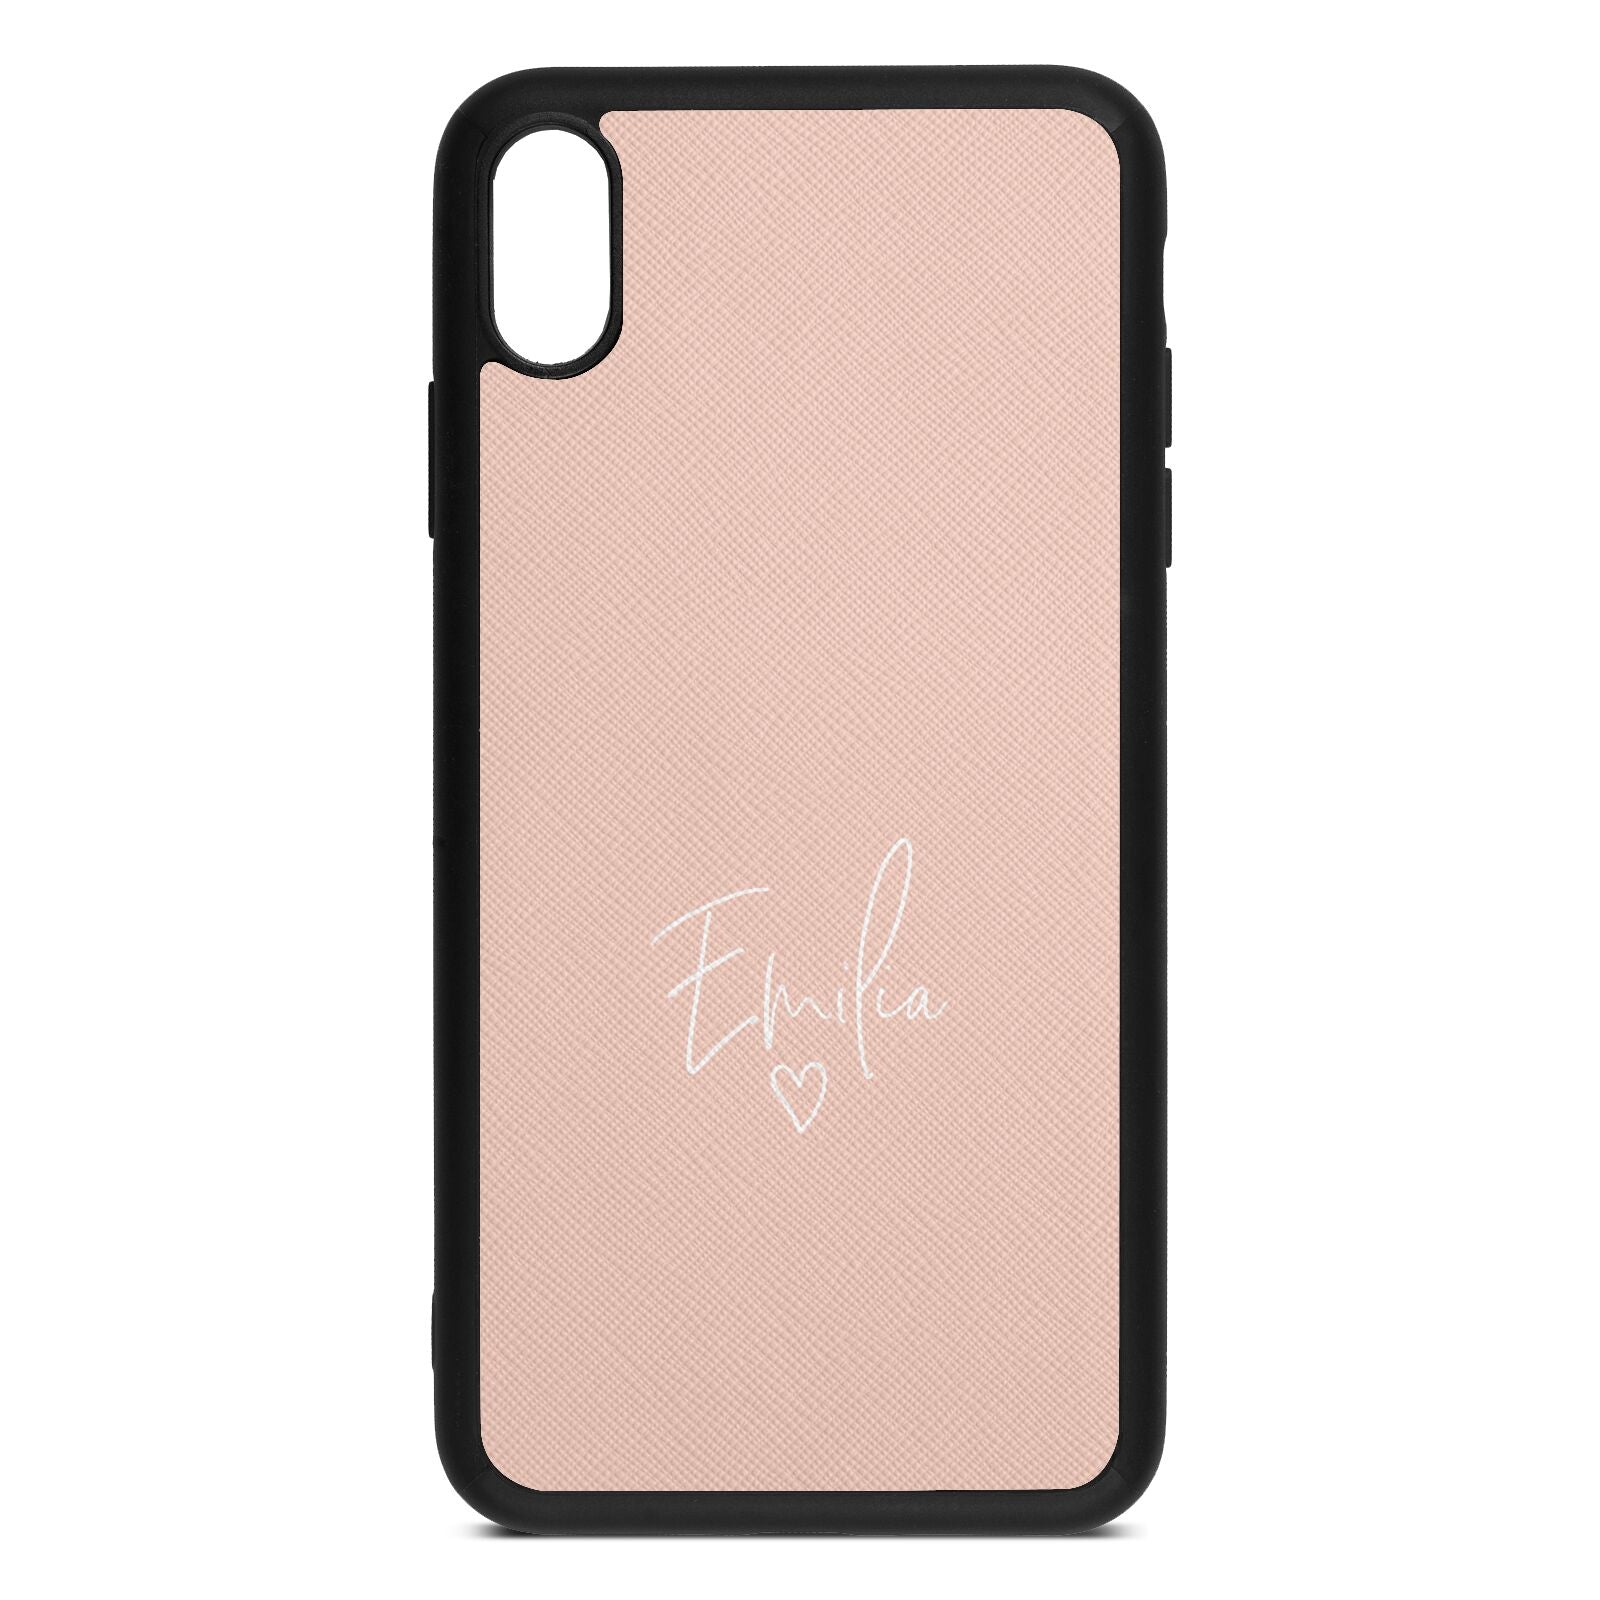 White Handwritten Name Transparent Nude Saffiano Leather iPhone Xs Max Case